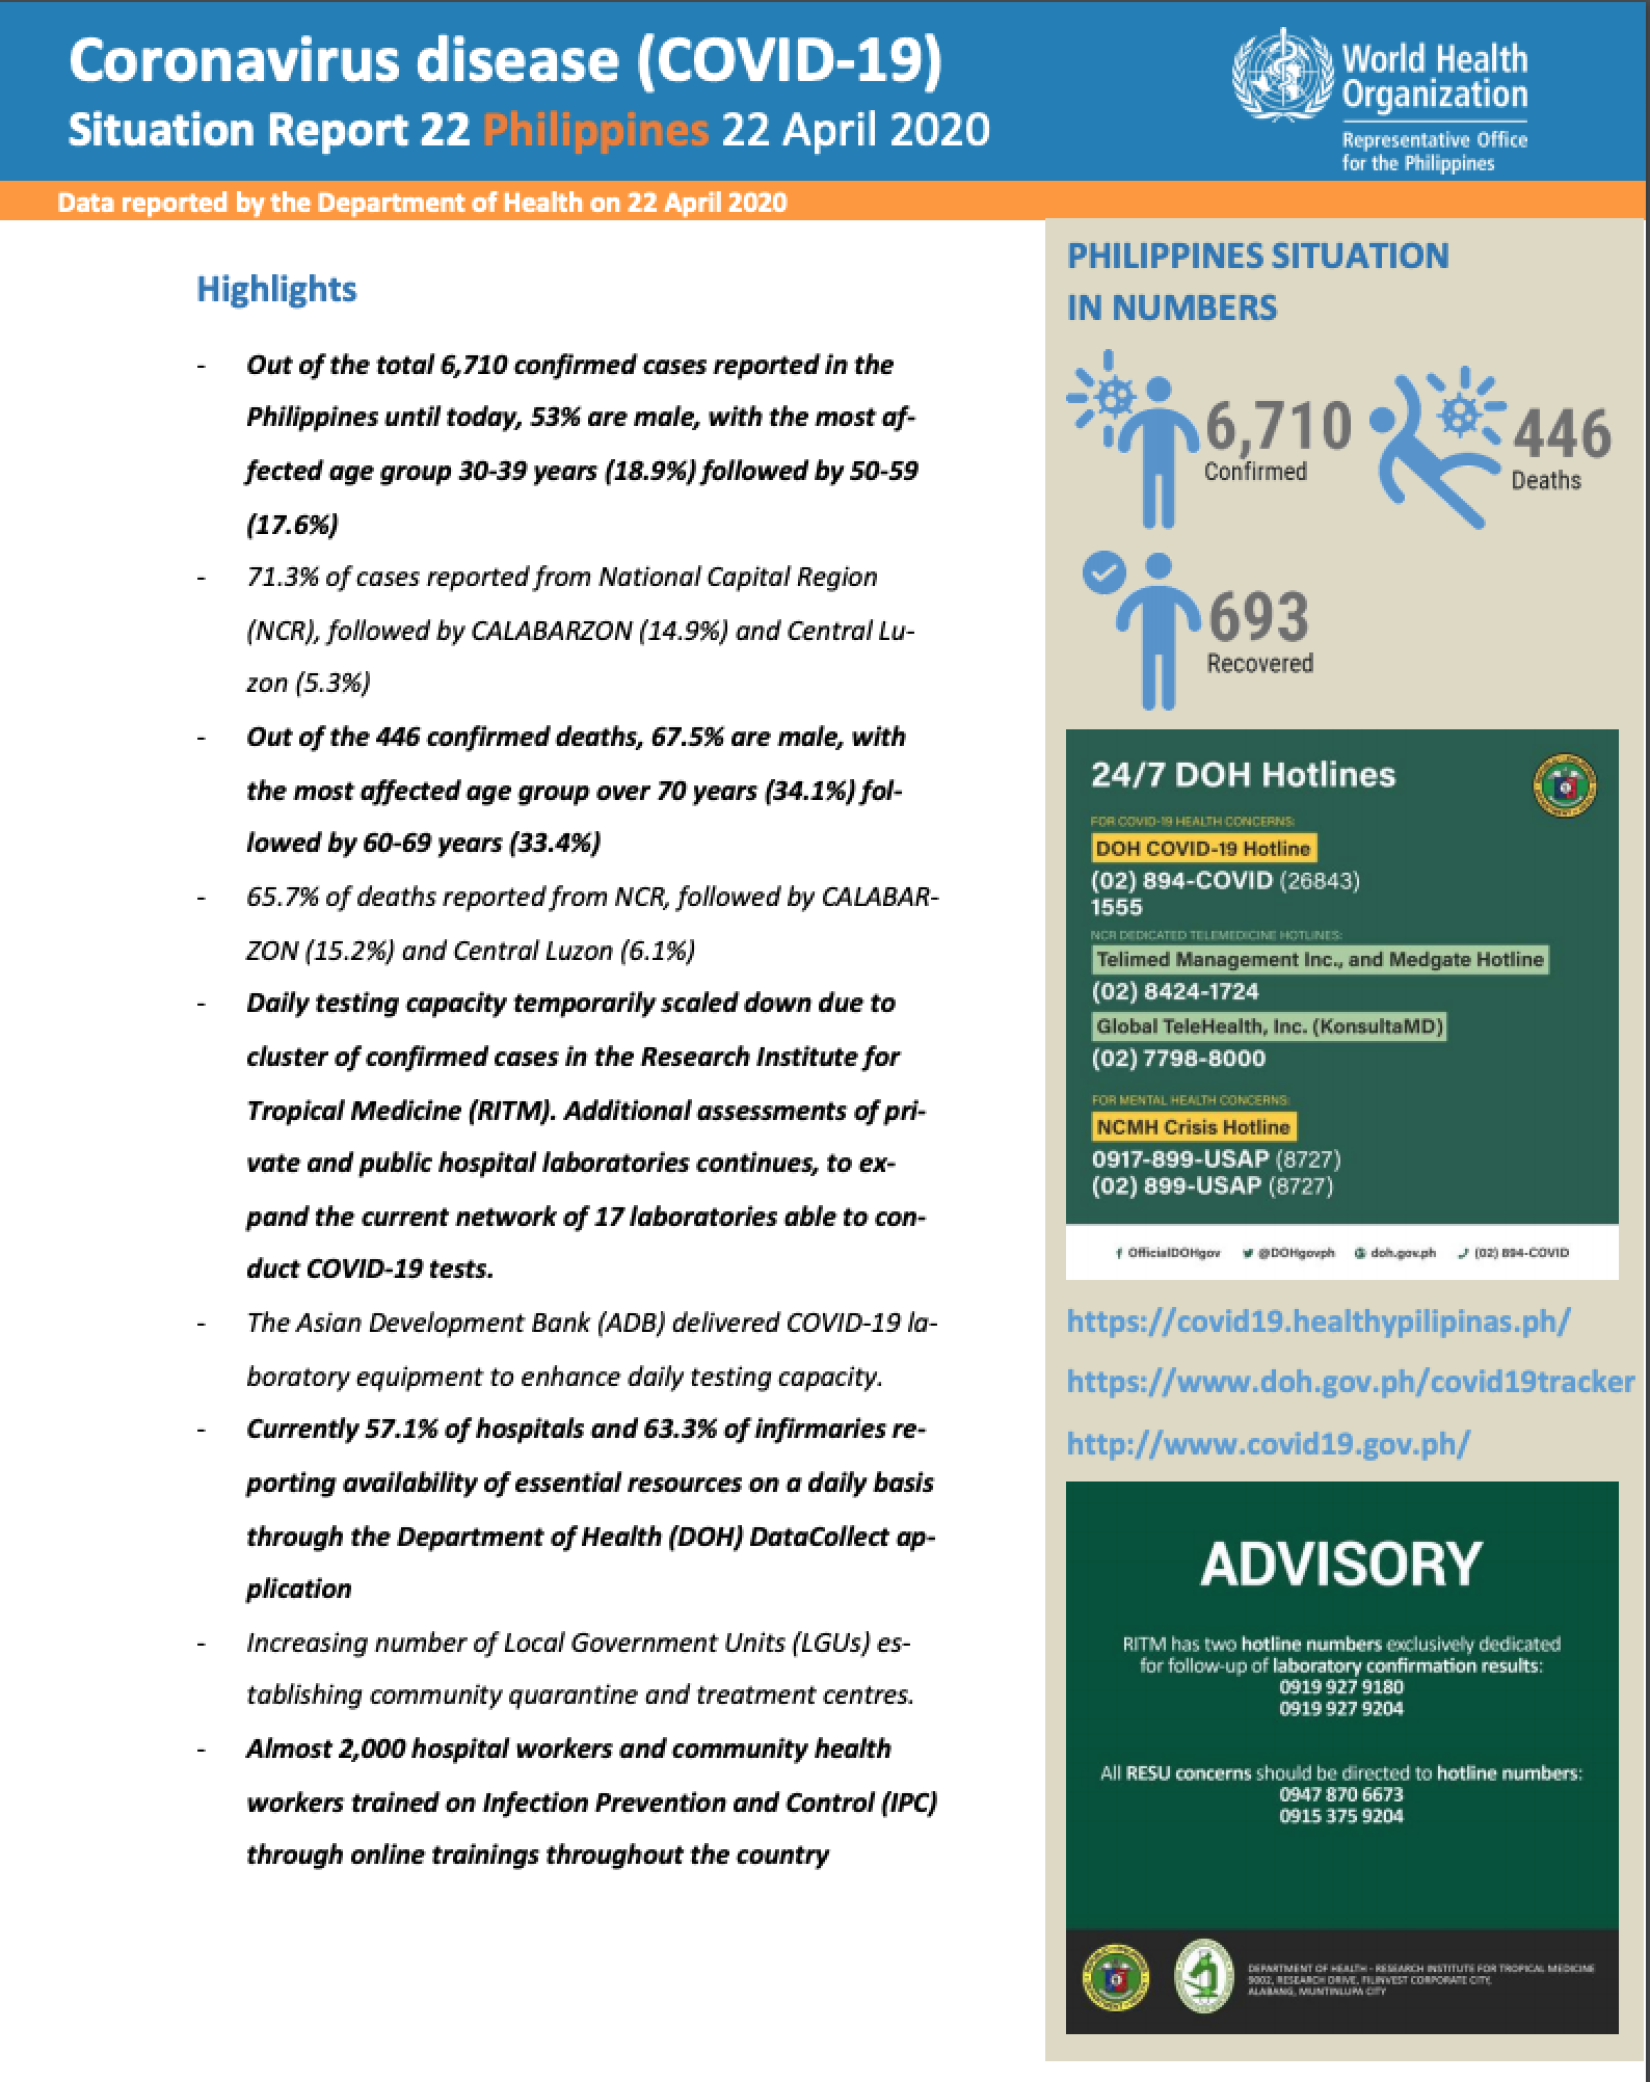 Cover of WHO COVID-19 Situation Report for the Philippines dated 22 April 2020